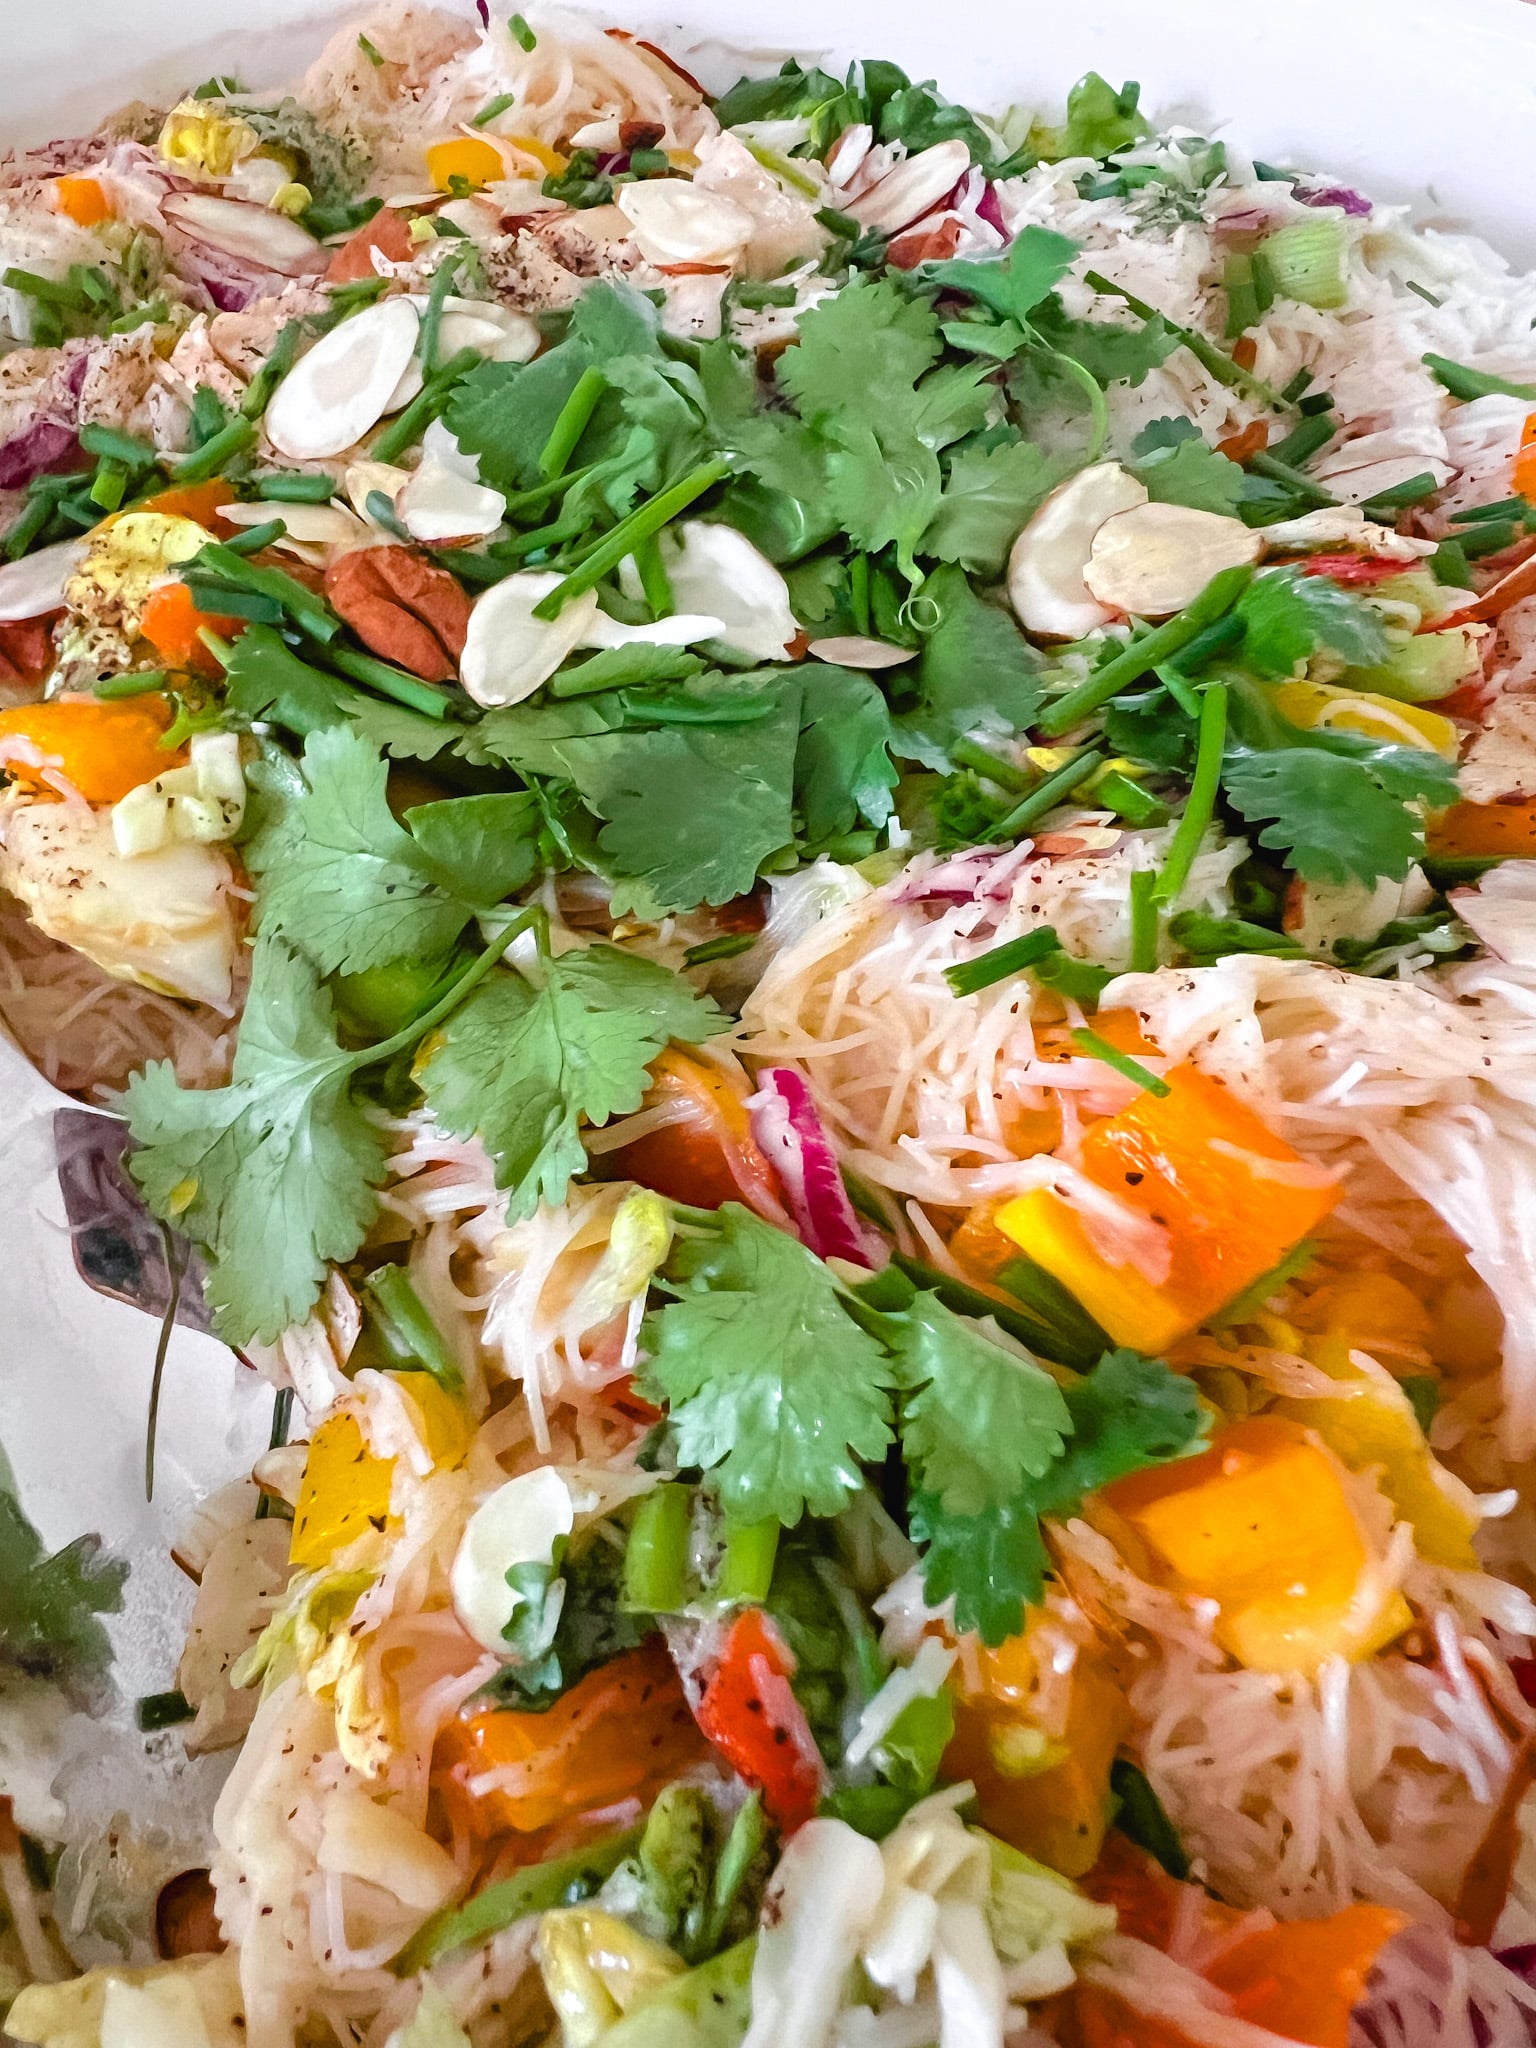 Summer Thai Chicken Noodle Salad Recipe. Thai Chicken Noodle Salad is a colorful medley of seasoned chicken breast, crunchy bell peppers, crisp cabbage, and tender rice noodles, all tossed in a rich, tangy peanut dressing.